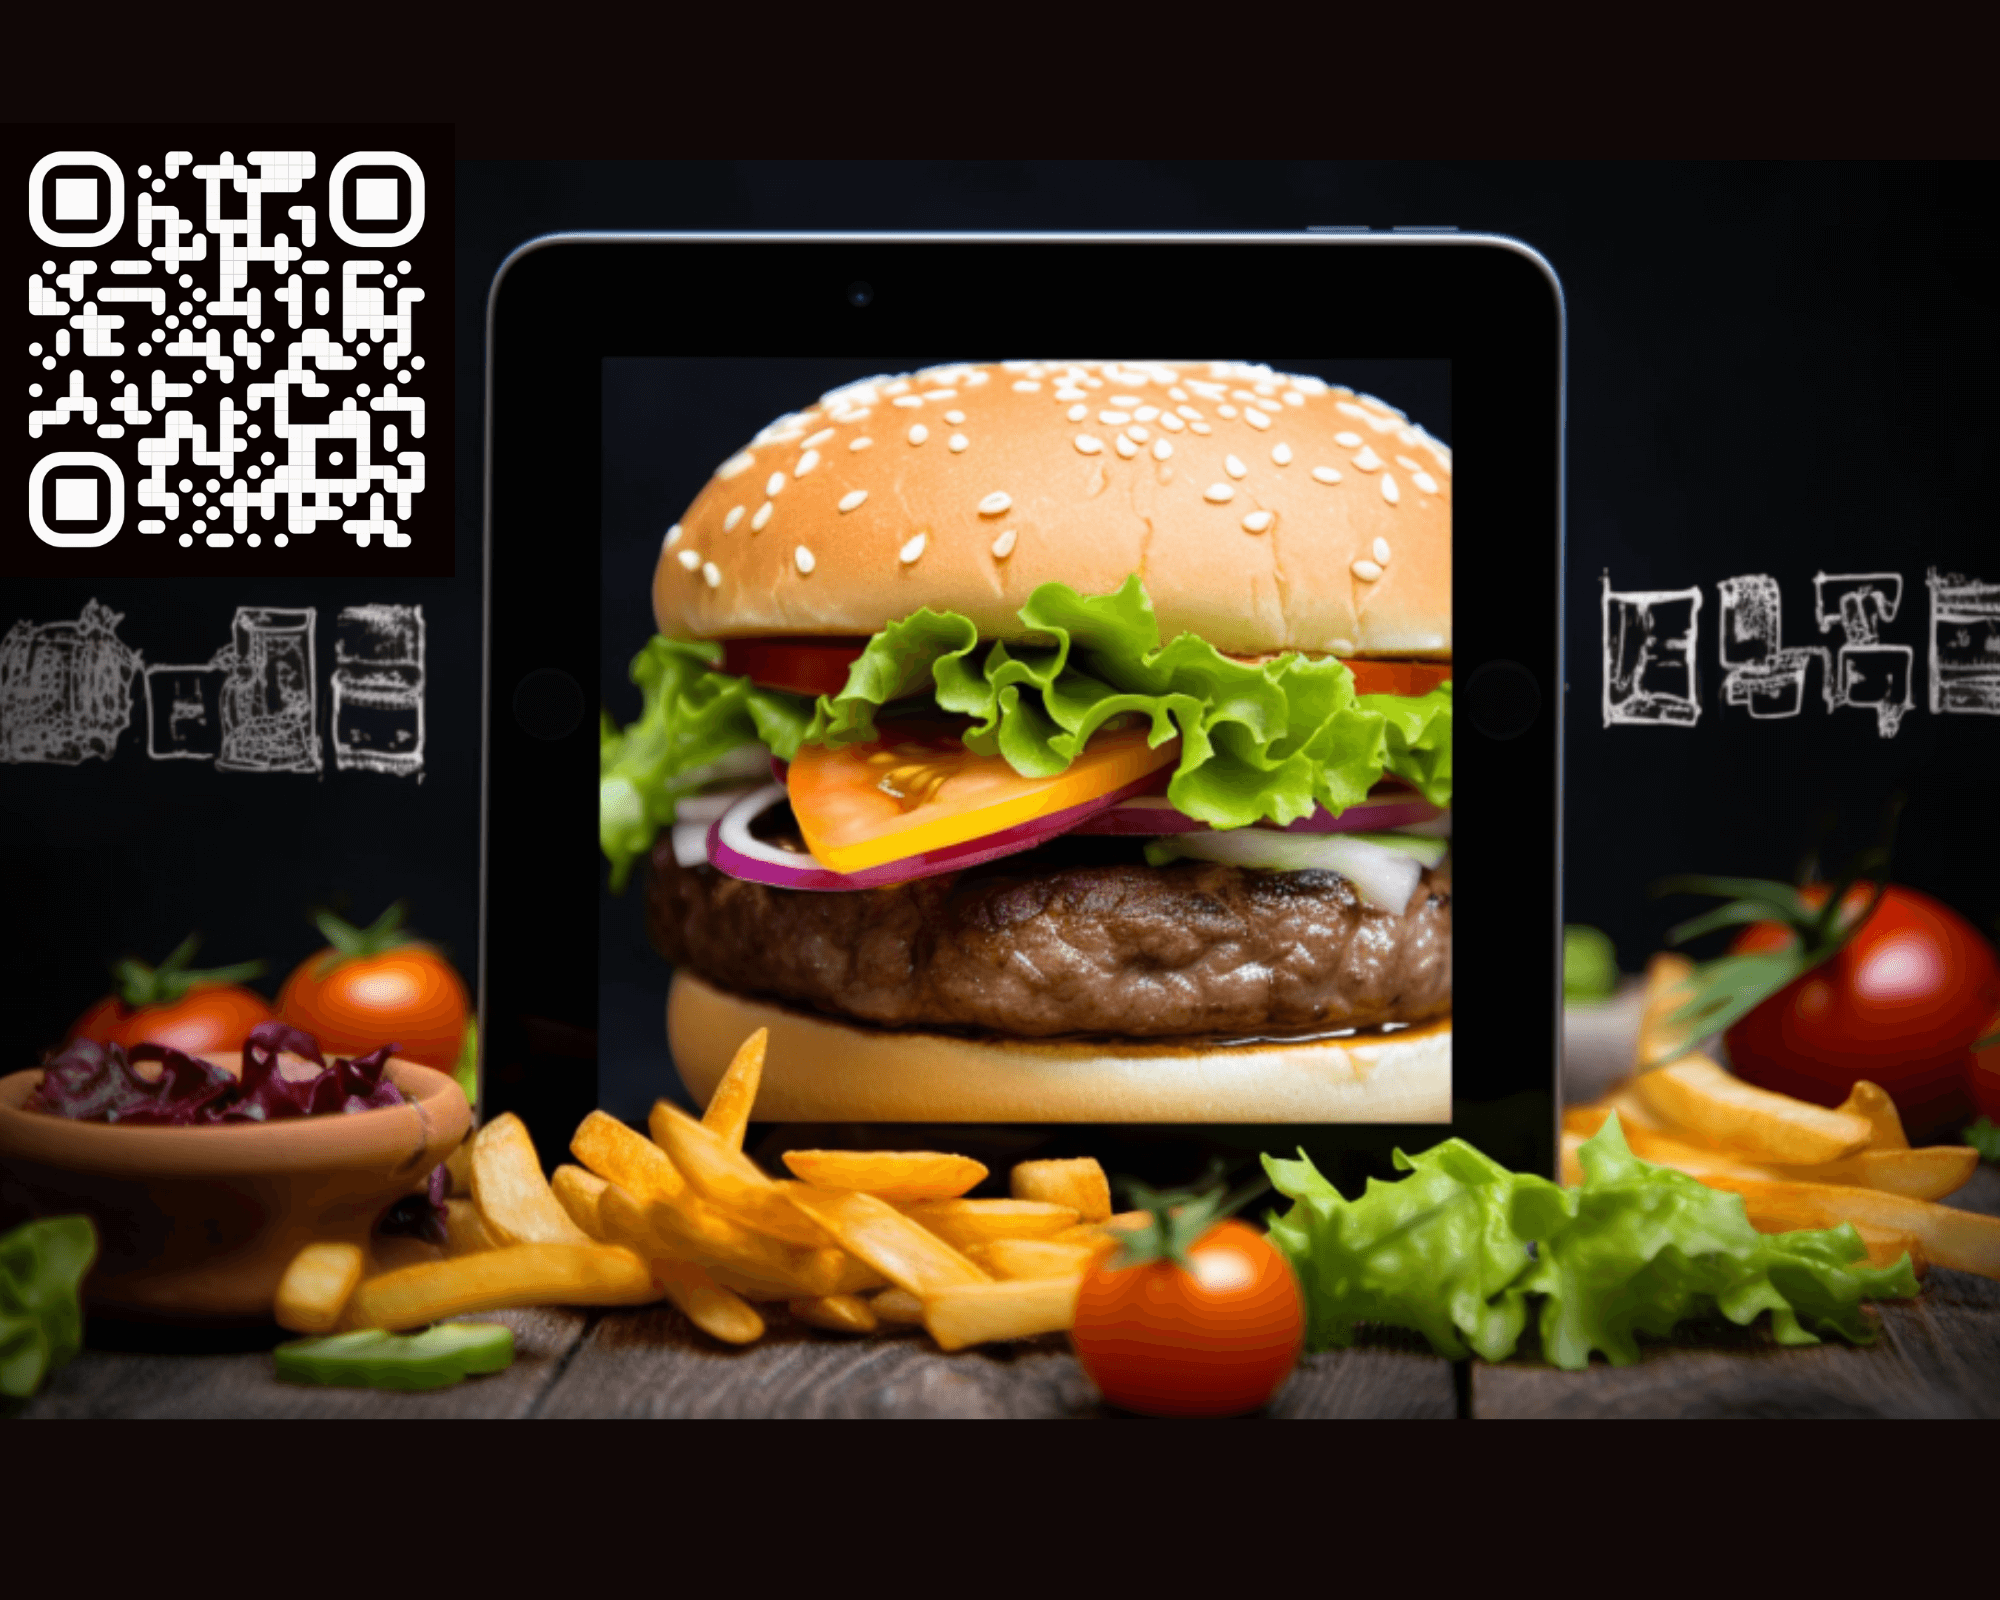 The impact of the PDF QR code generator on the restaurant business evolution